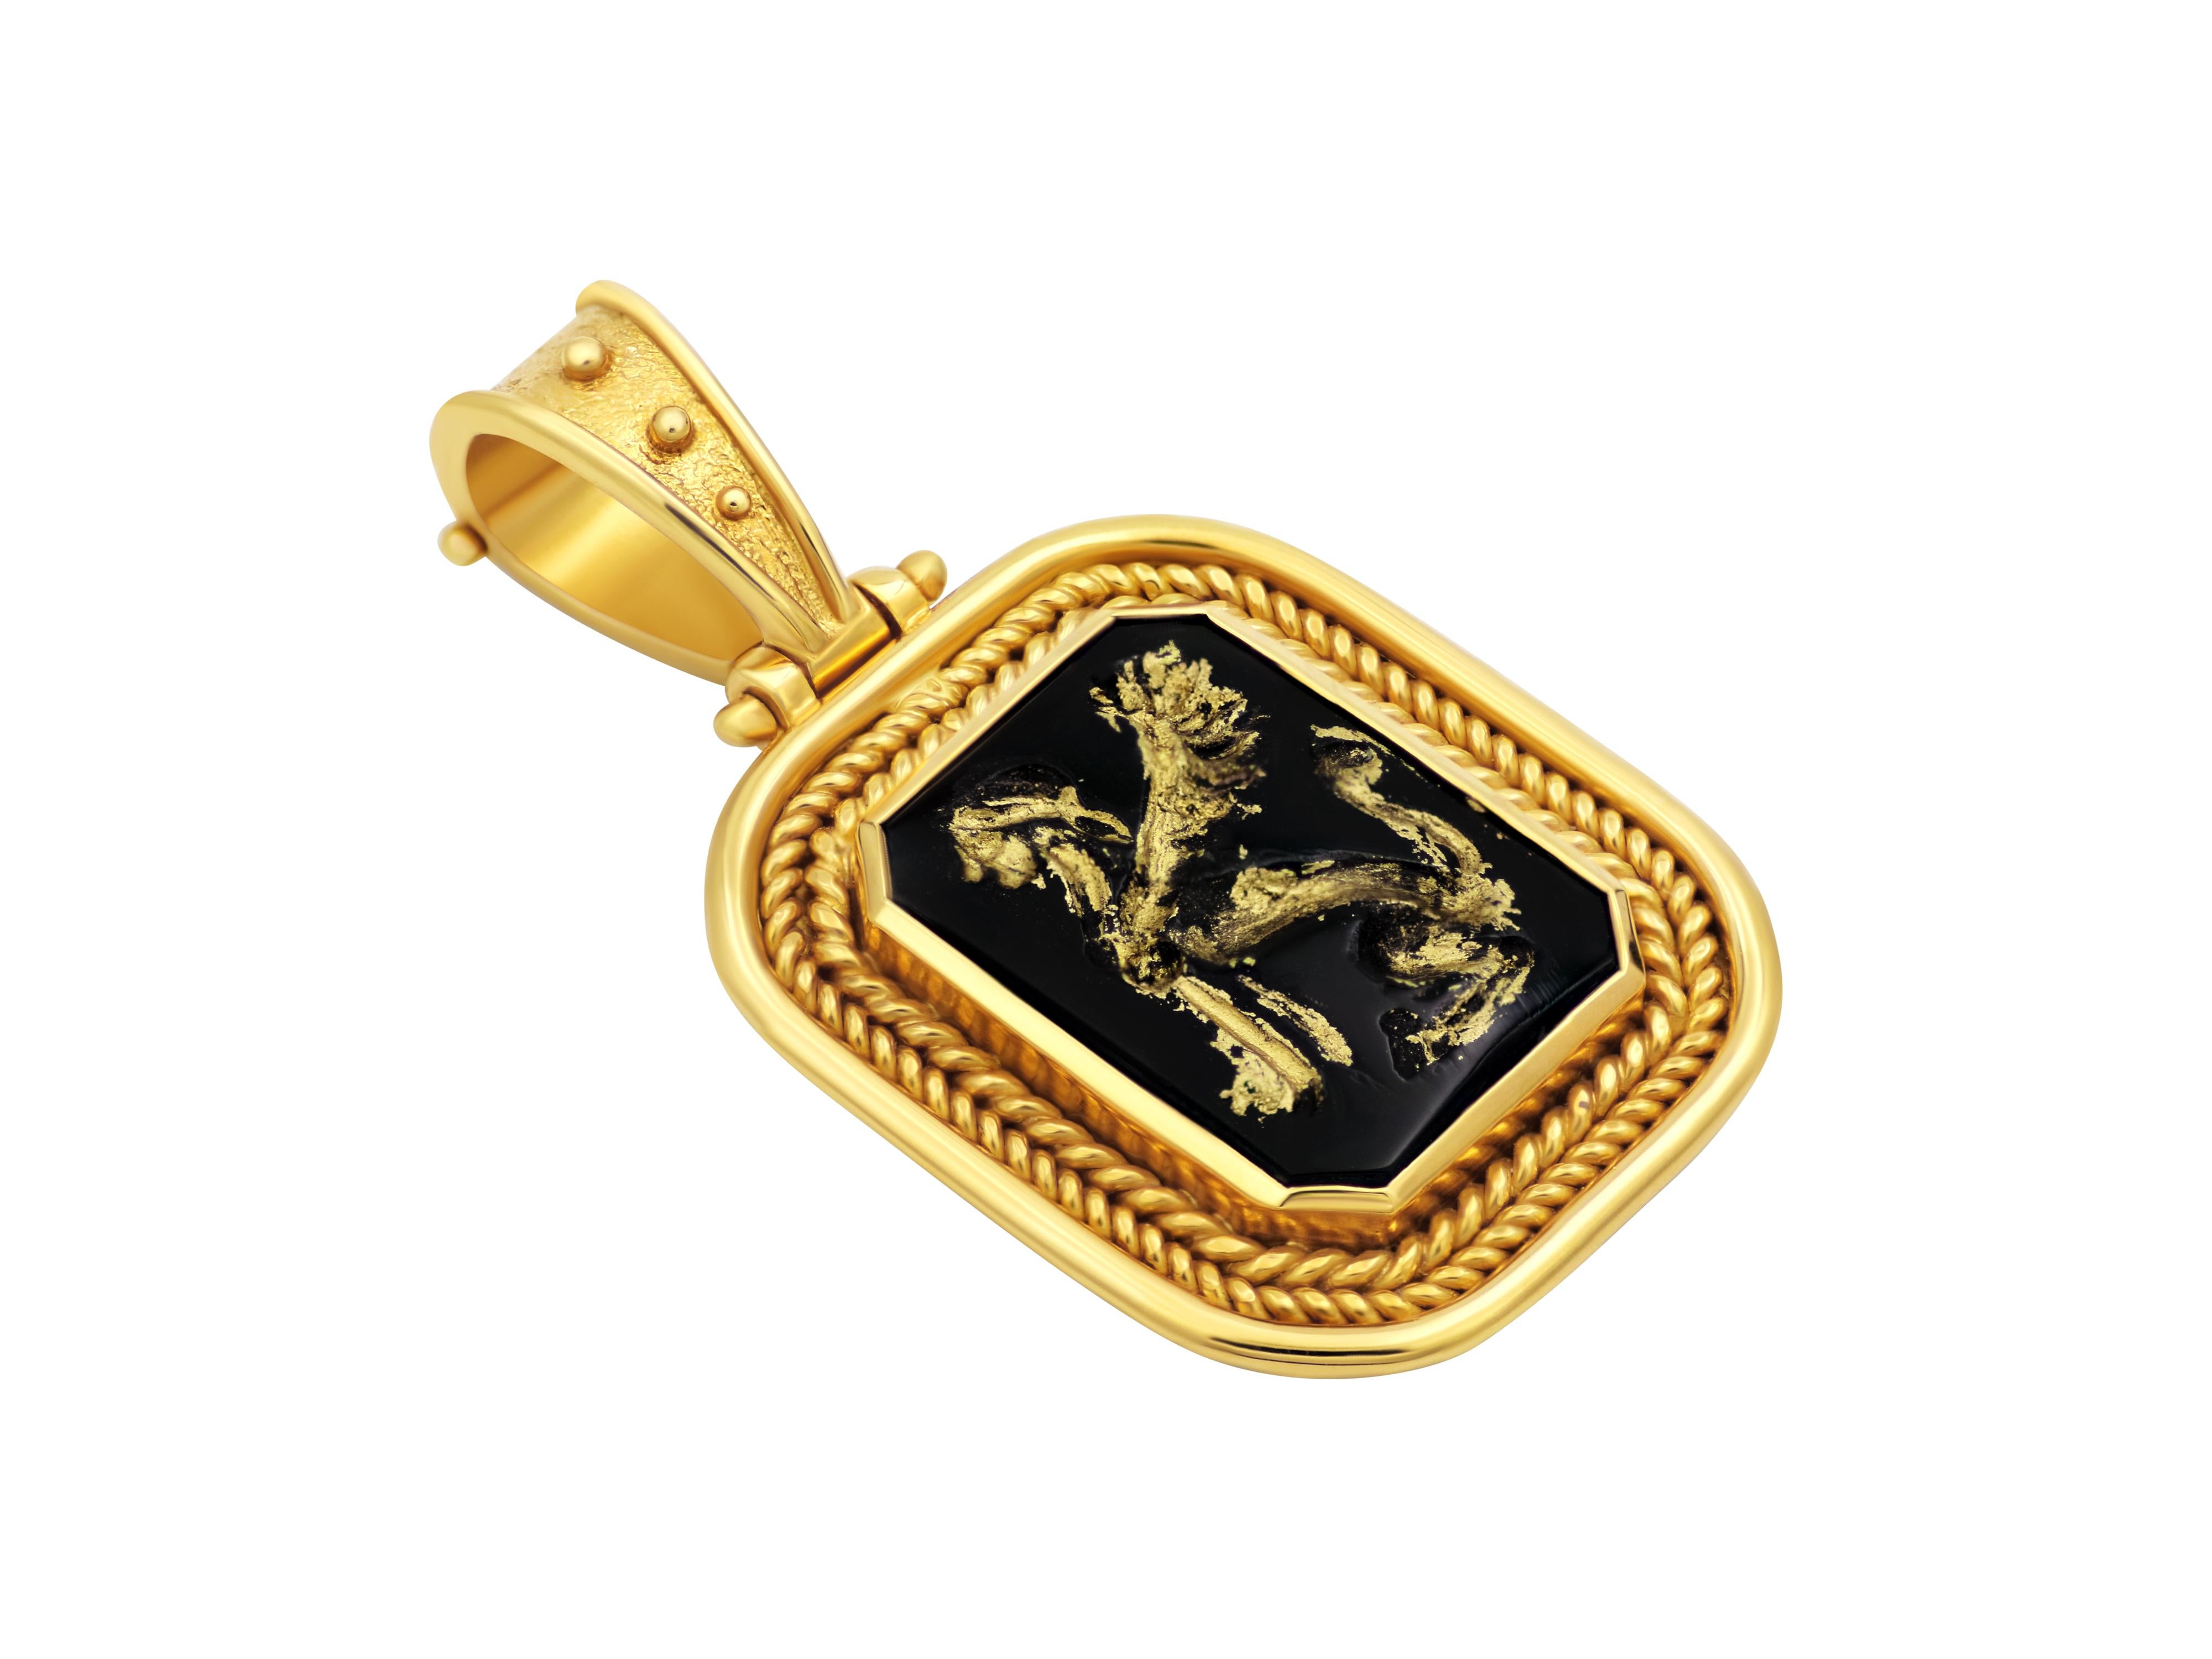 Museum replica pendant in 18 karat yellow gold completely handmade set with black Onyx hand carved with the mythical sphinx. A beautiful and regal setting with double wires and filigrees complete this elegant pendant. Here we have used gold paint to